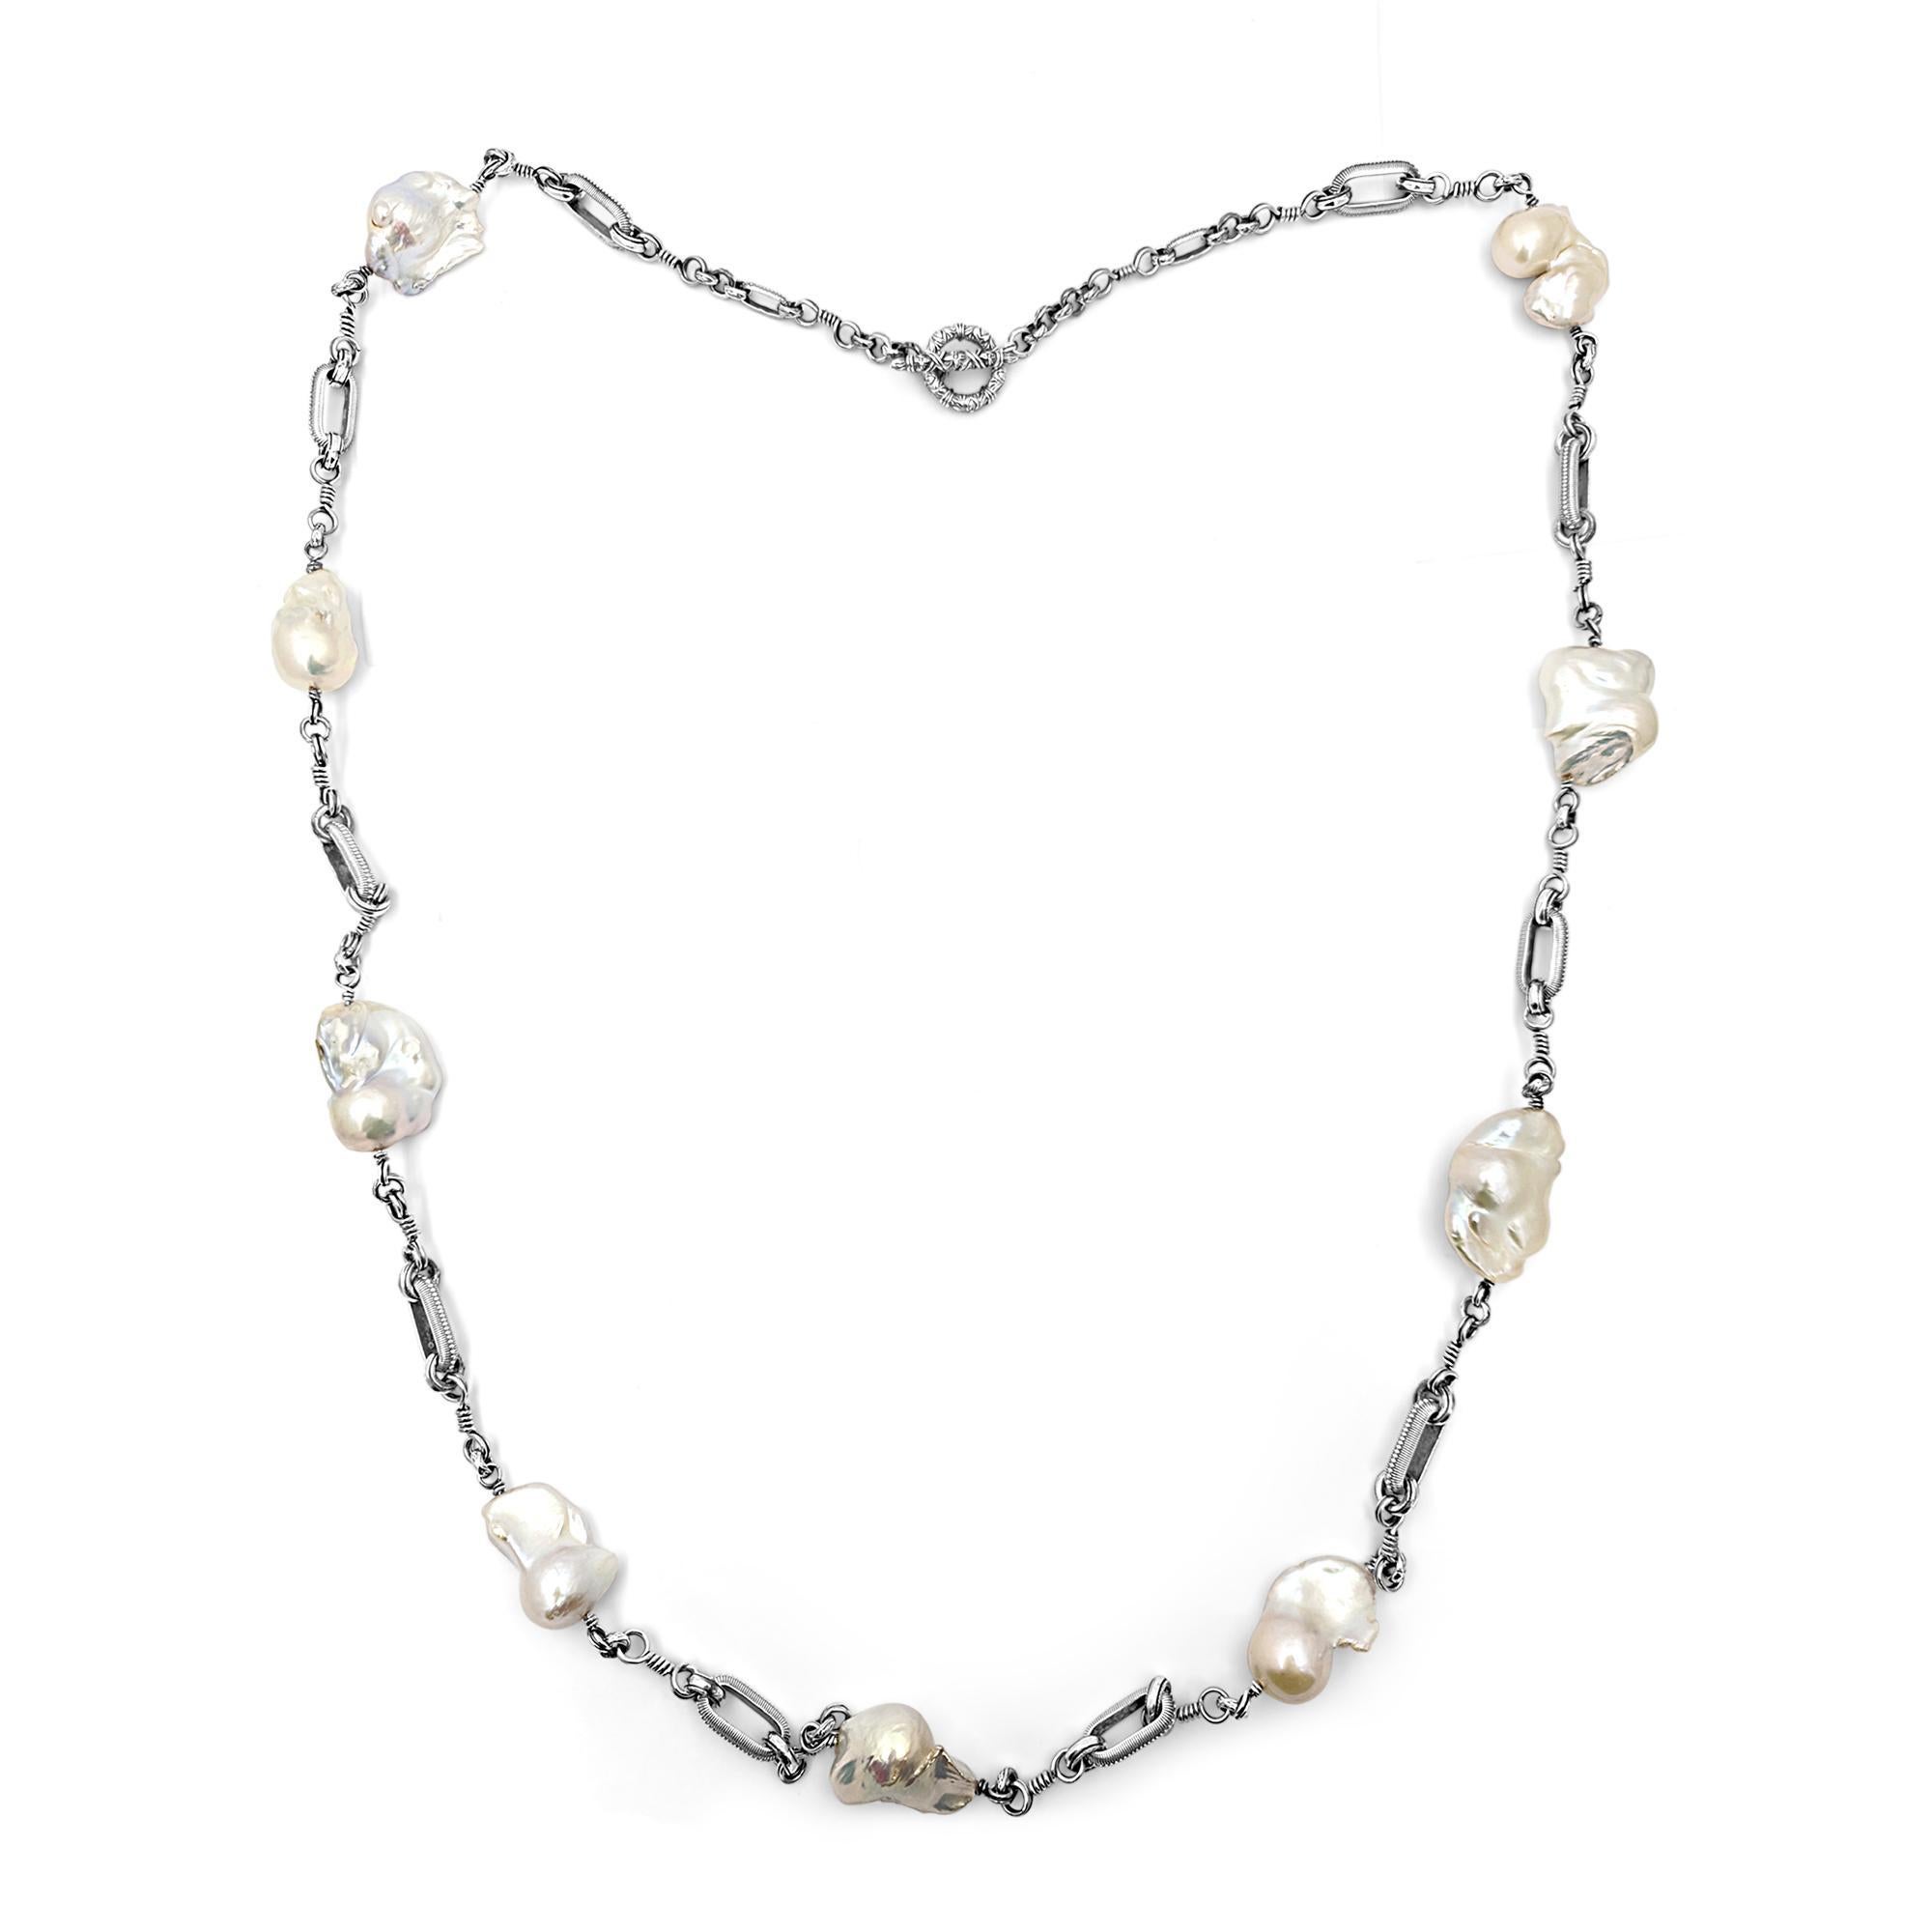 Indulge in the timeless elegance of the Medium White Baroque Pearl Long Single Strand Necklace with Medium Oval Chain Link, a masterpiece crafted by Stephen Dweck. Each lustrous baroque pearl, with its unique shape and iridescent glow, is